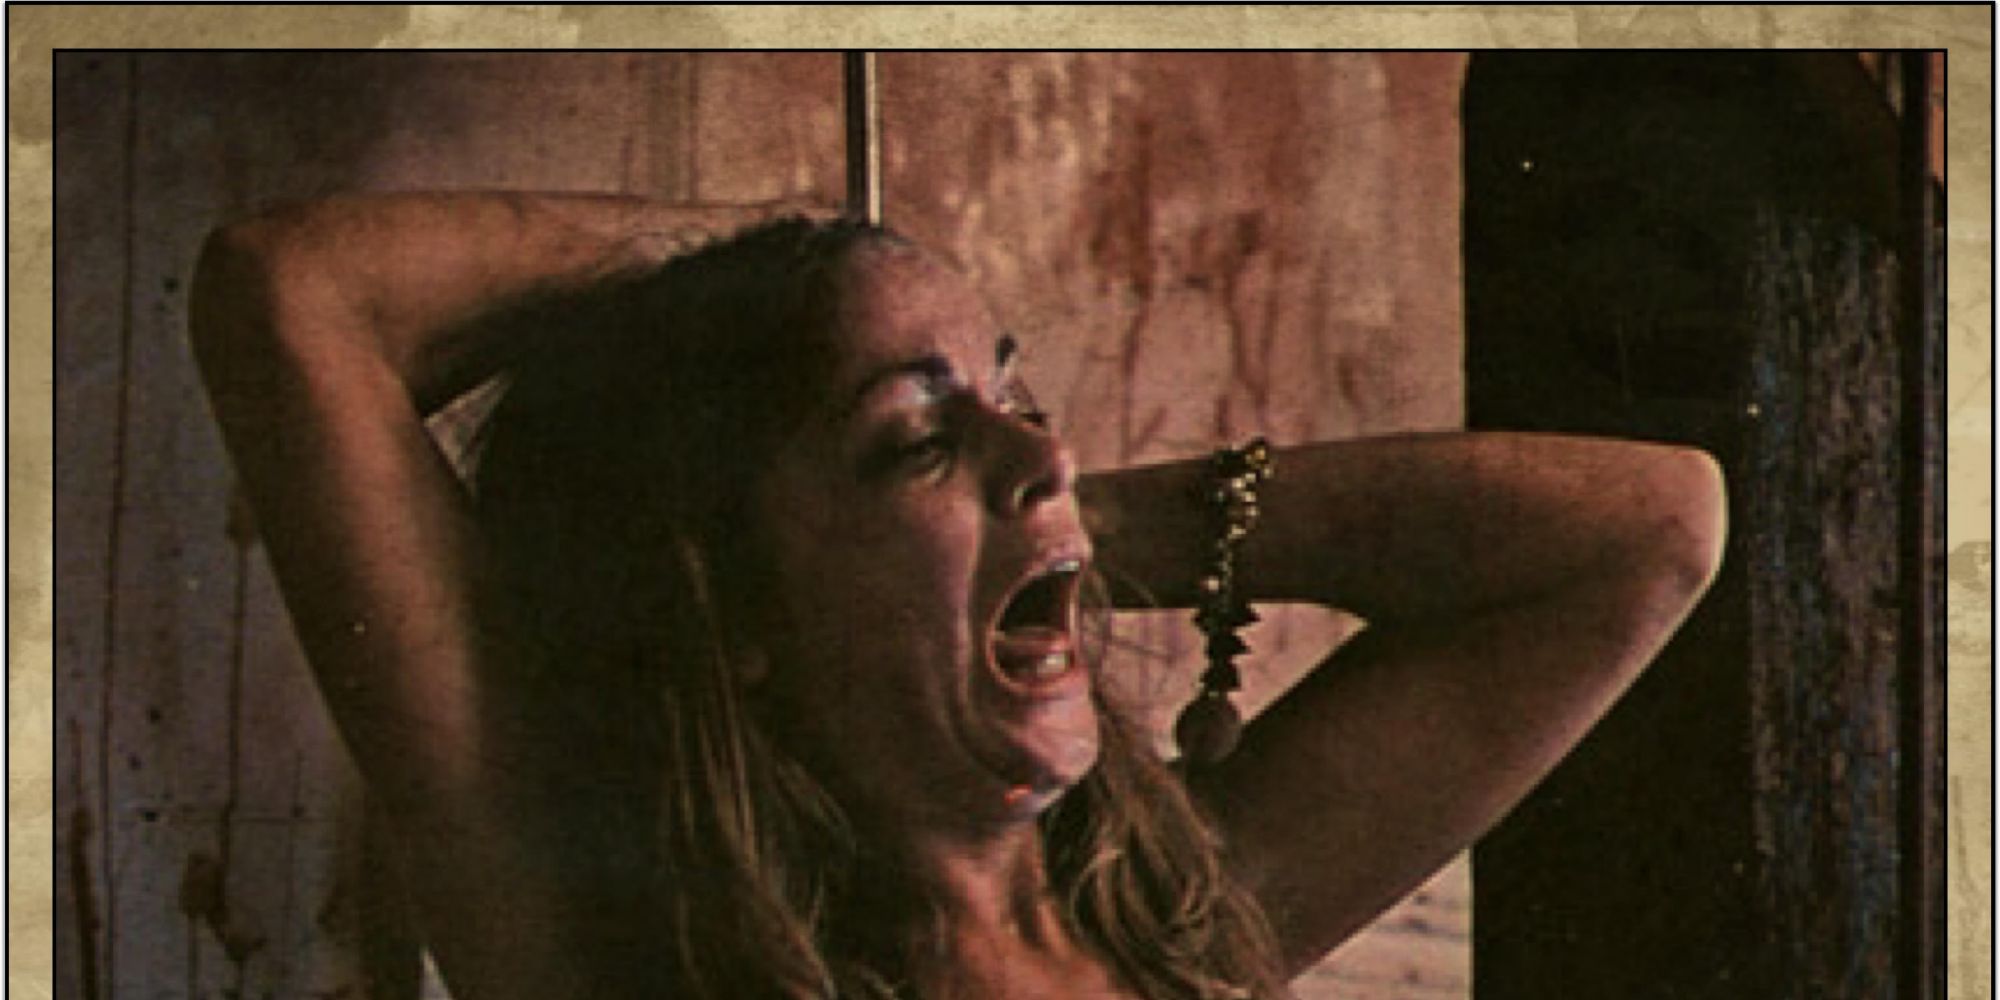 Pam writhes on a meat hook in The Texas Chain Saw Massacre 1974